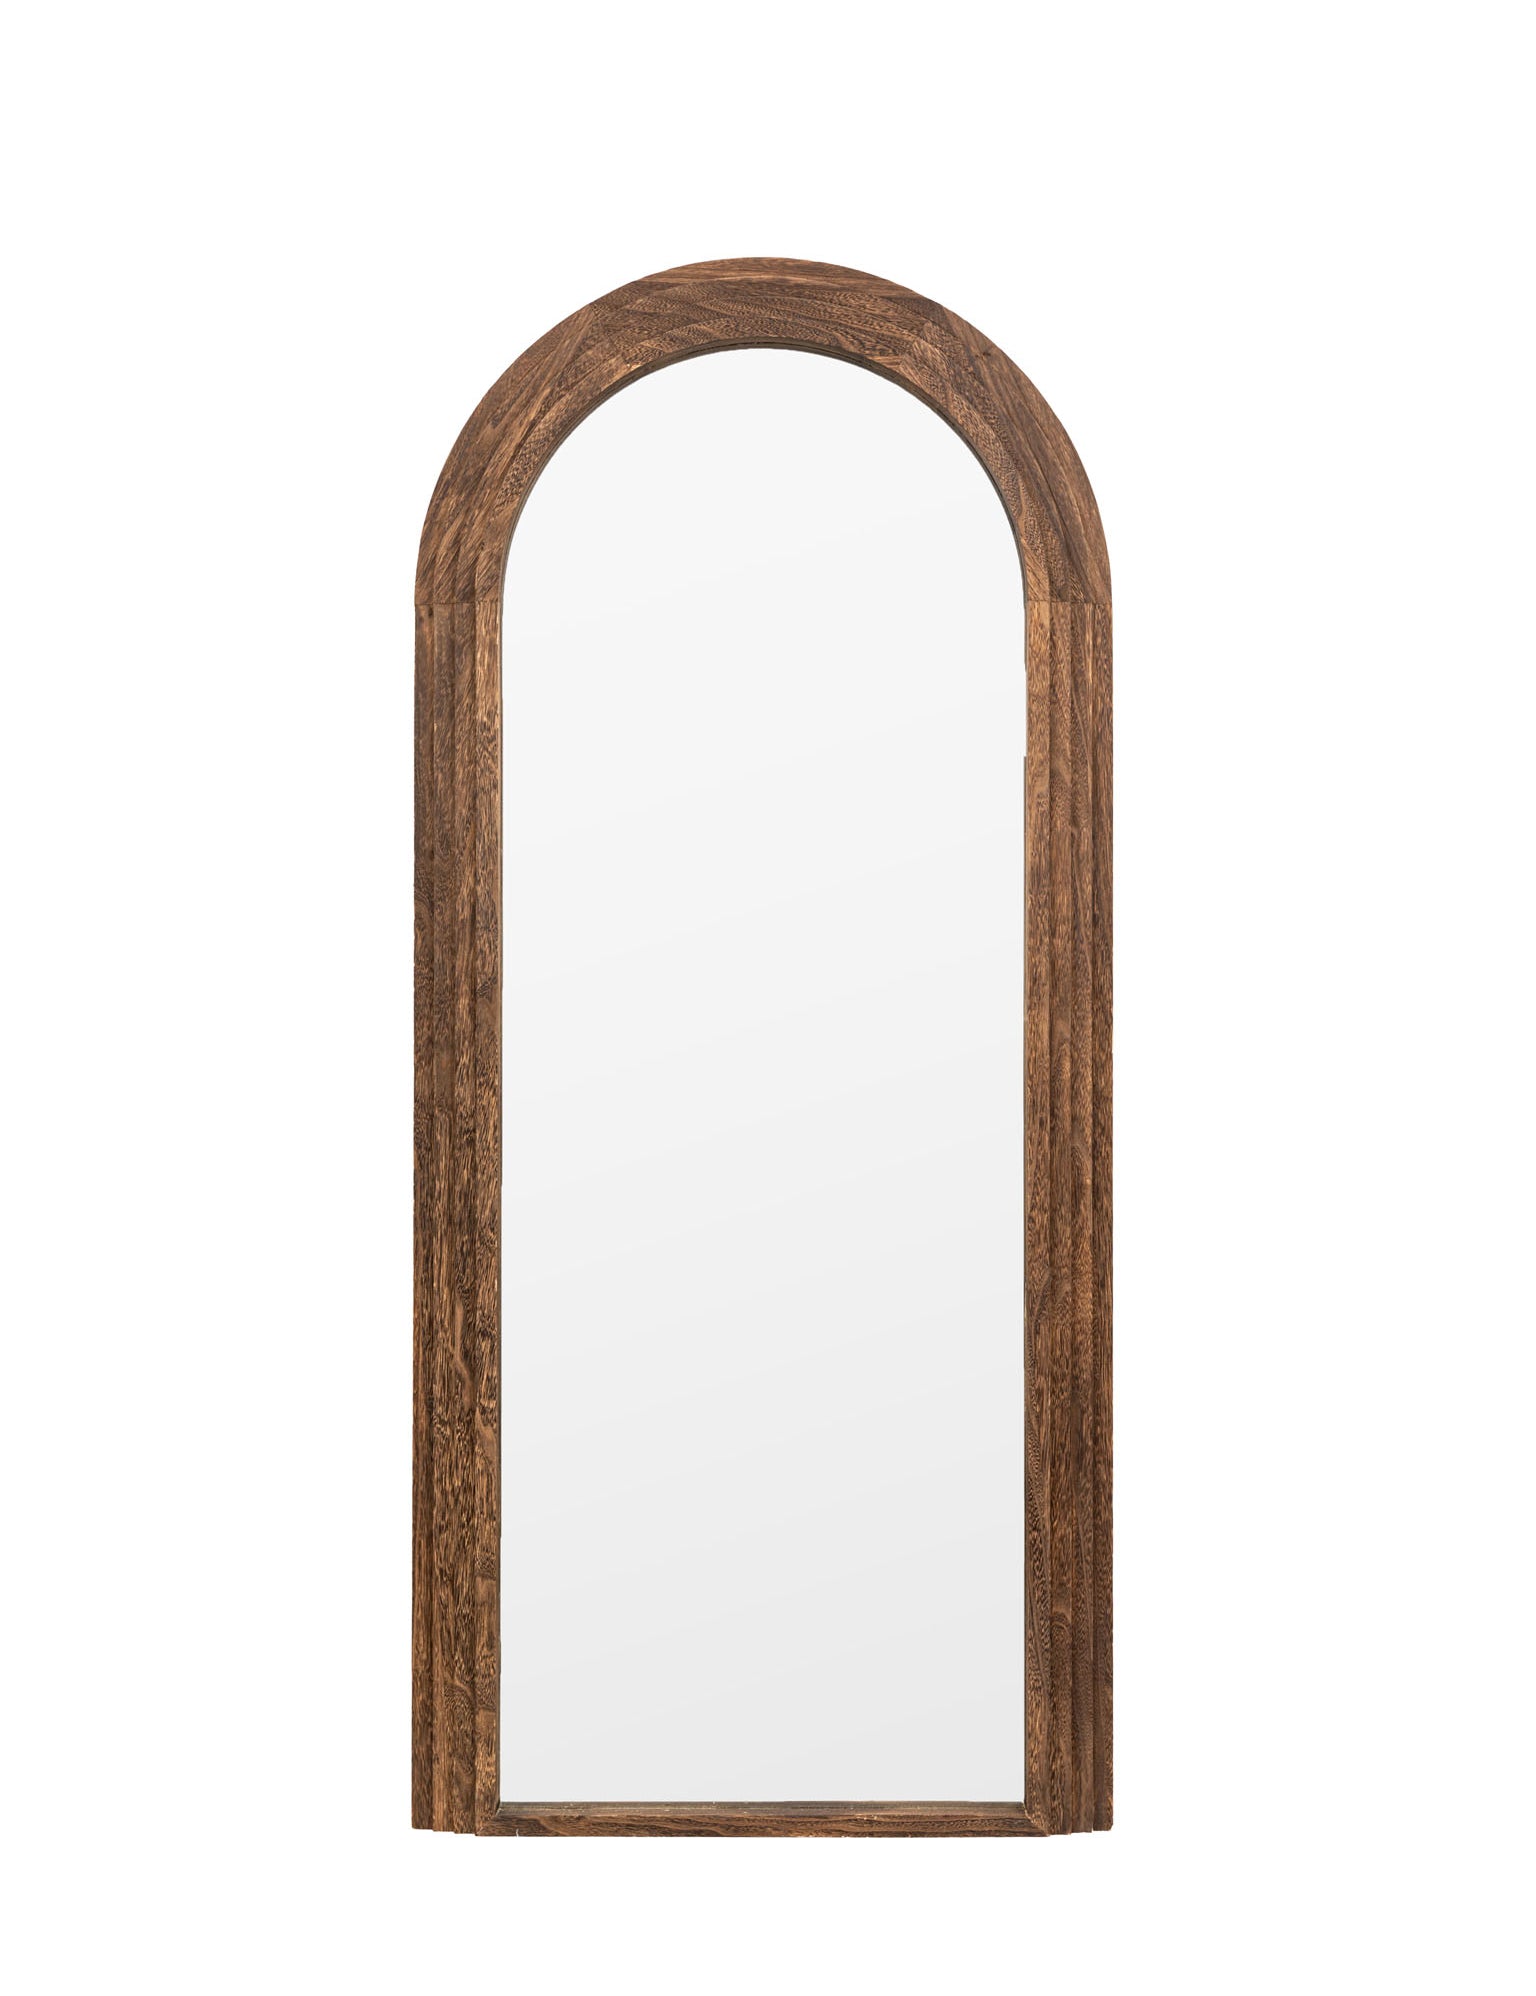 Natural wood grain mirror with curved top